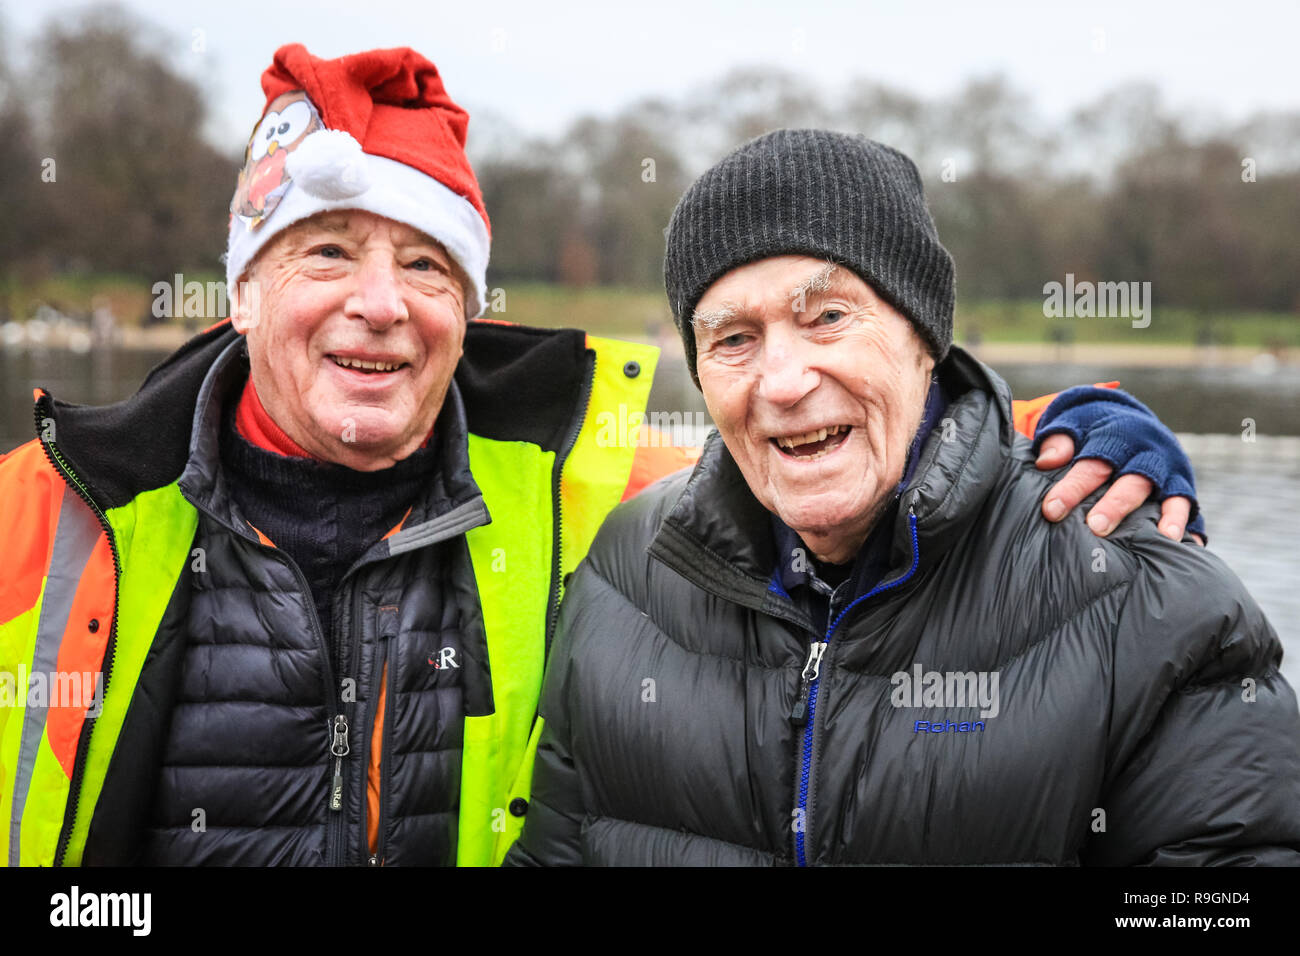 Hyde Park, London, 25th Dec 2018. The Serpentine Club President with the Club's oldest member, Alan Lacy, who is 95 and in good spirits. The 154th annual Christmas morning race for the 'Peter Pan Cup' gets under way at the Serpentine Swimming Club in London's Hyde Park. Swimmers brave the wintry weather and freezing cold open water of the Serpentine for the traditional event. Credit: Imageplotter News and Sports/Alamy Live News Stock Photo